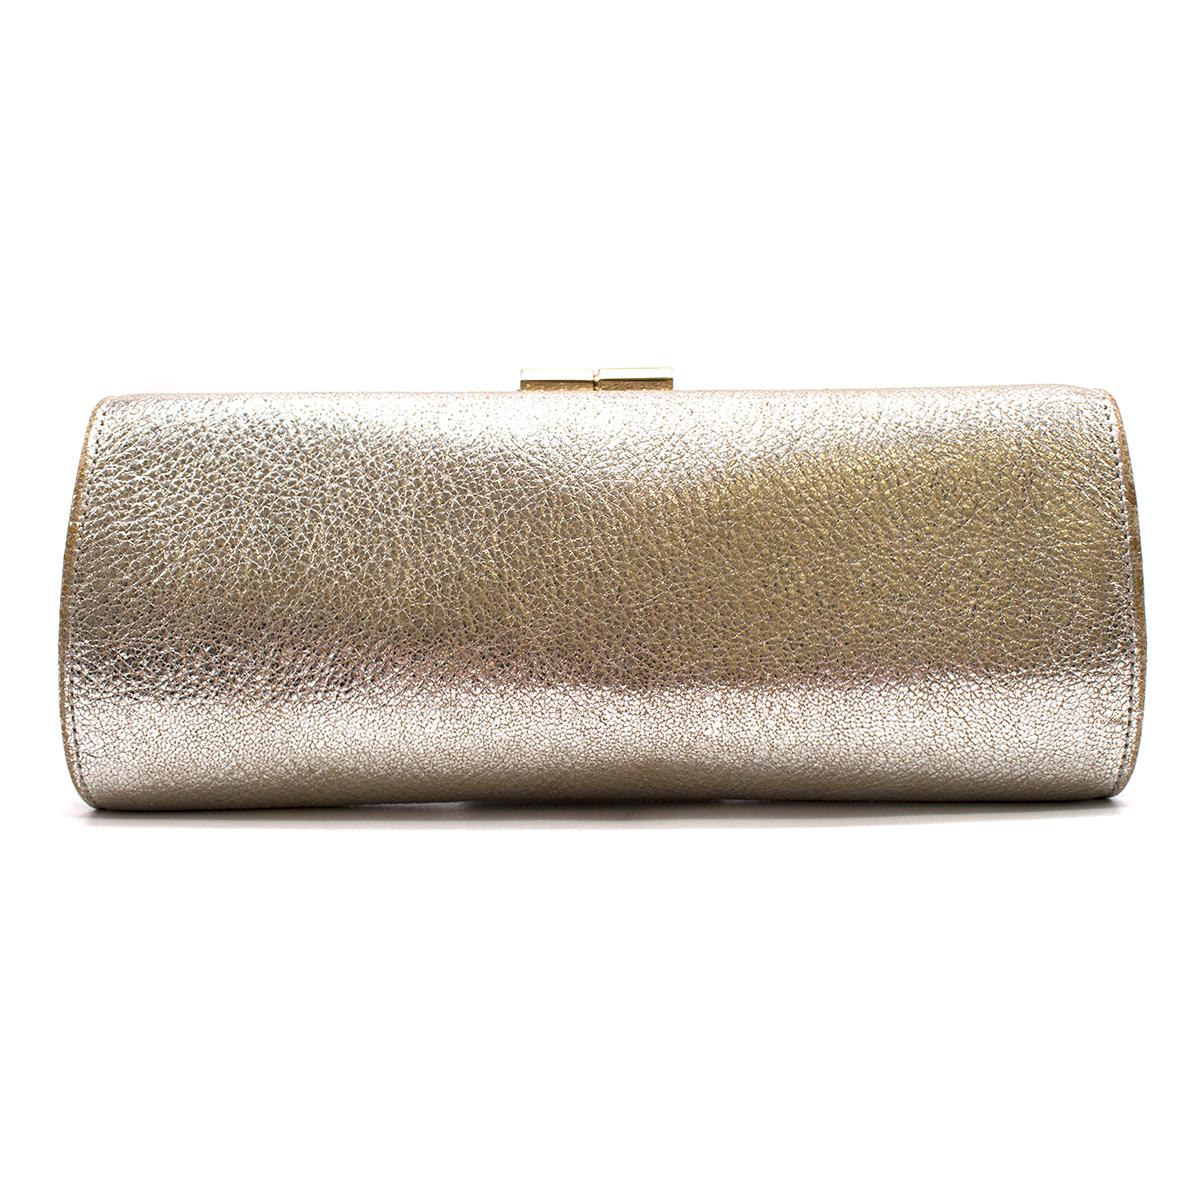 Jimmy Choo Silver Leather Clutch

-Silver tone leather clutch
-'Jimmy Choo' embossed clasp
-Beige lining
-One interior pocket

-The clutch was bought at a sample sale

Please note, these items are pre-owned and may show signs of being stored even